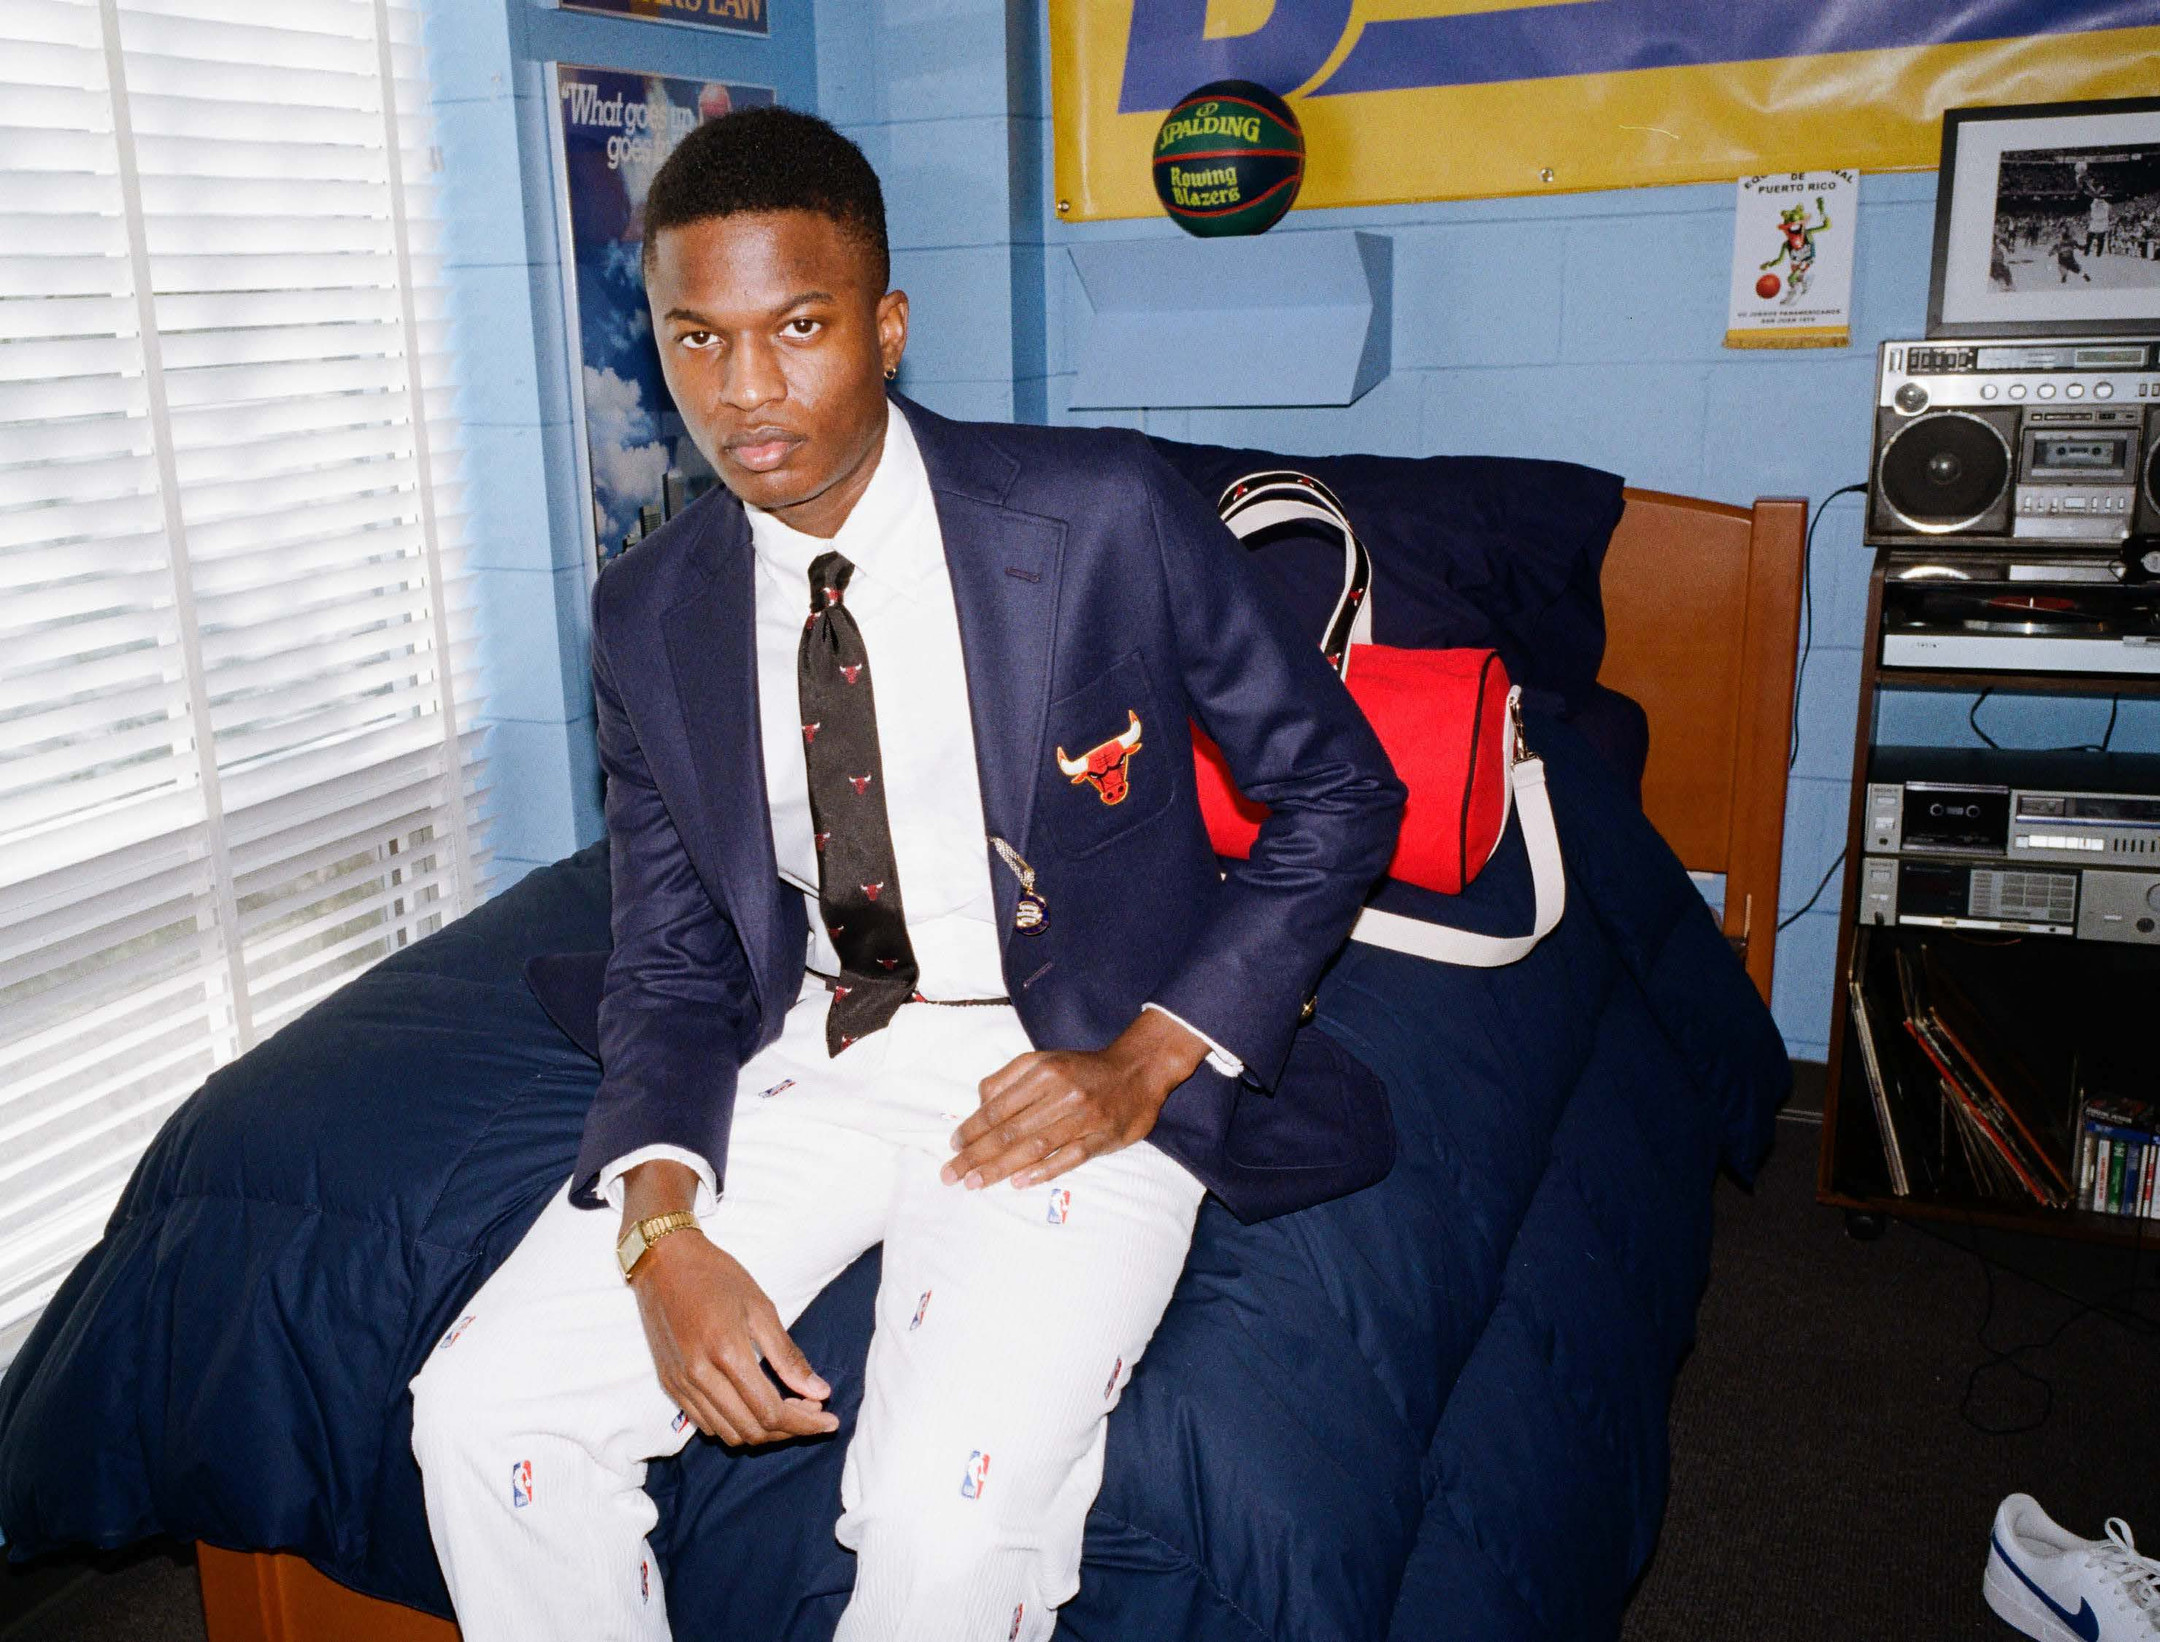 Model sitting on a bed in a dorm room, wearing the Chicago Bulls Tie, Blazer, and Belt.